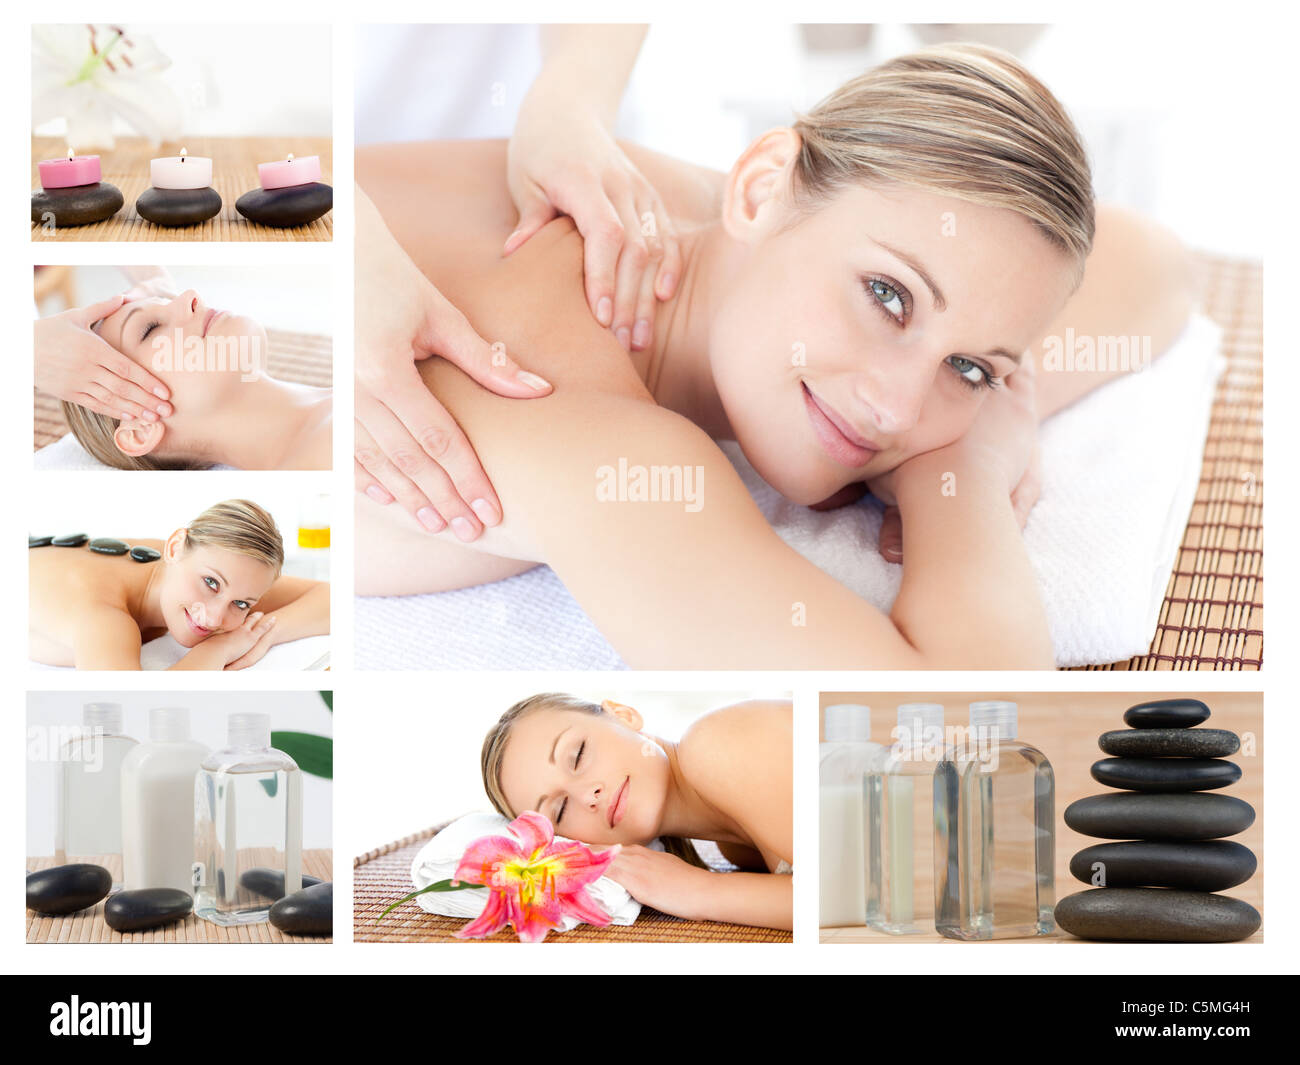 Collage of a beautiful blond woman receiving a massage Stock Photo